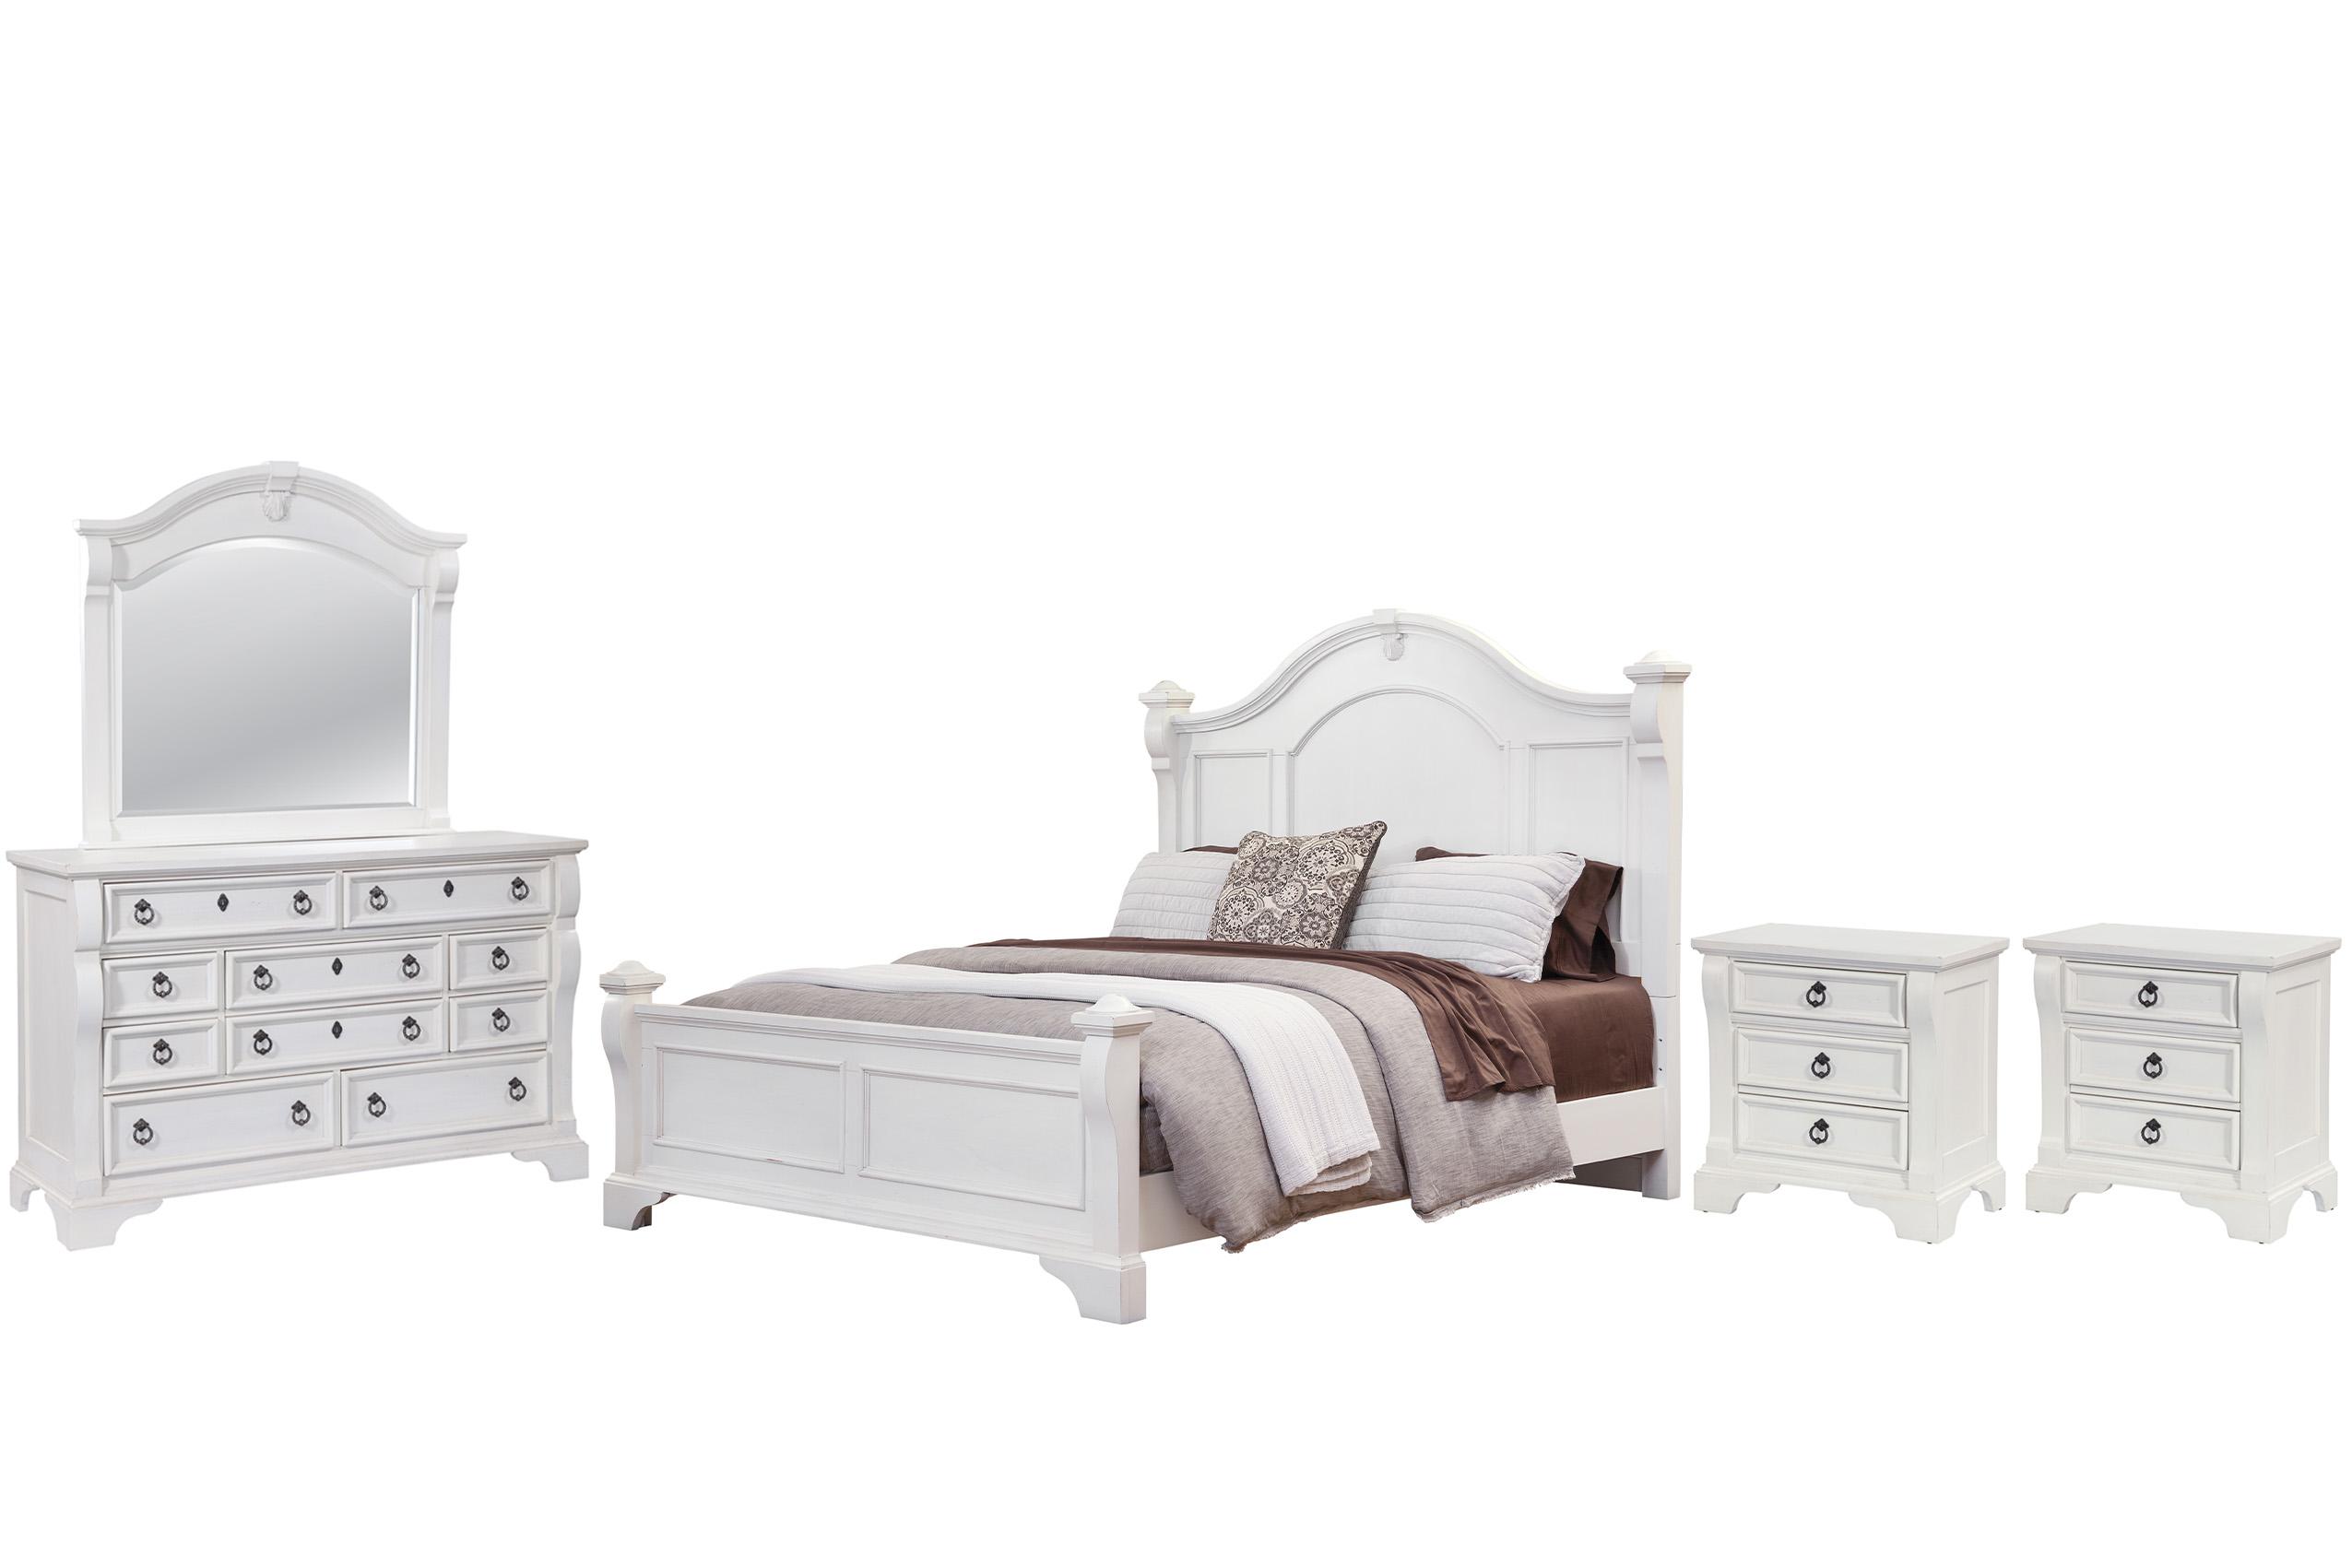 Classic, Traditional, Cottage Poster Bedroom Set HEIRLOOM 2910-50POS 2910-50POS-2NDM-5PC in White 